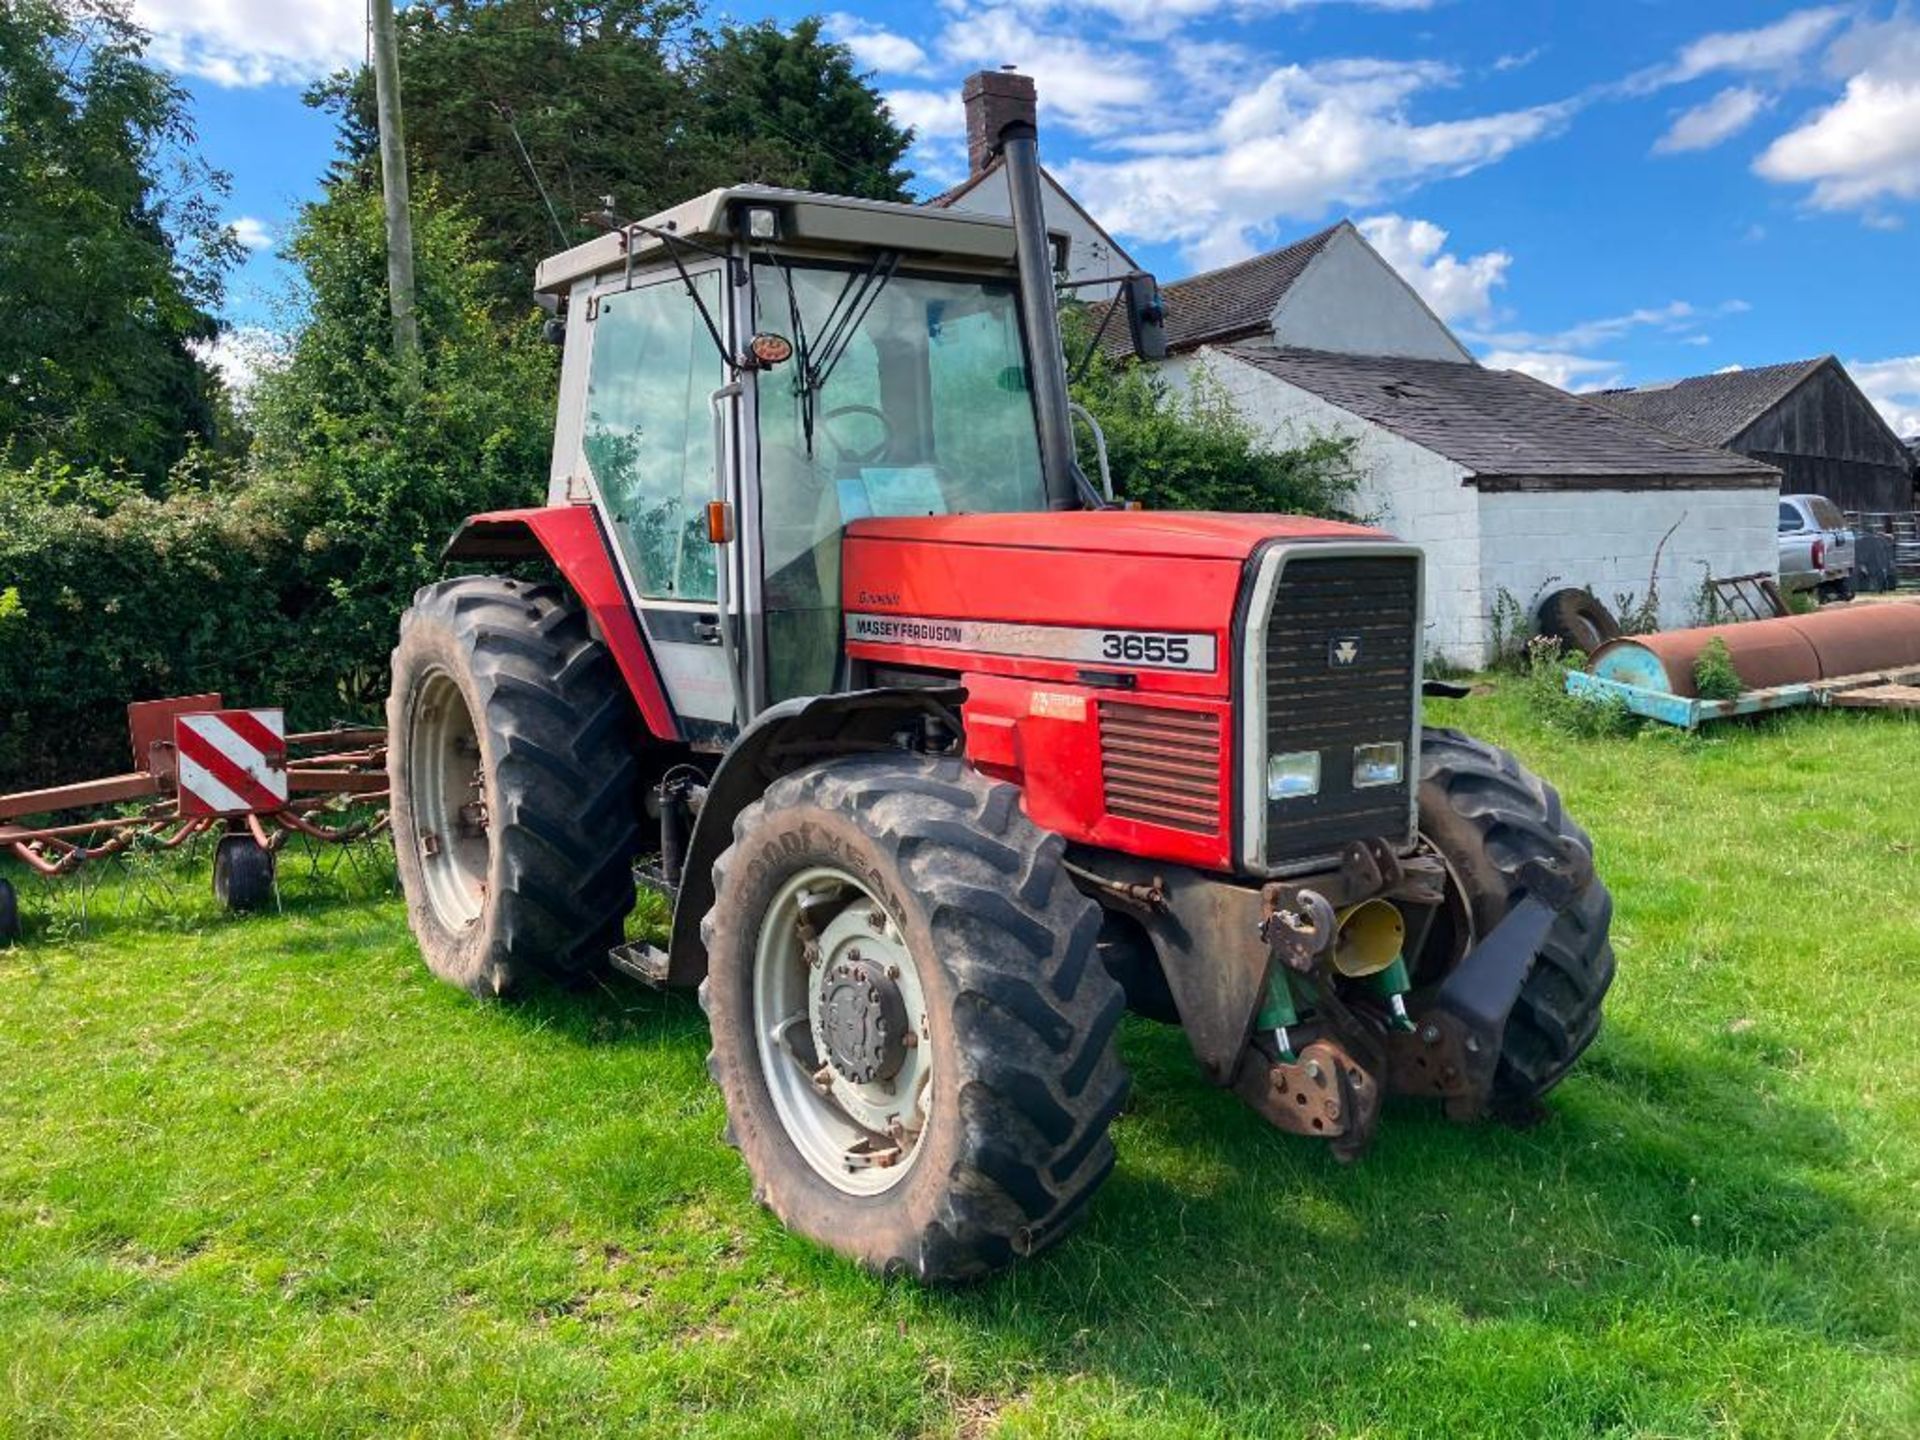 1995 Massey Ferguson 3655 Dynashift 4wd Datatronic tractor with 3 manual spools, front linkage and P - Image 10 of 23